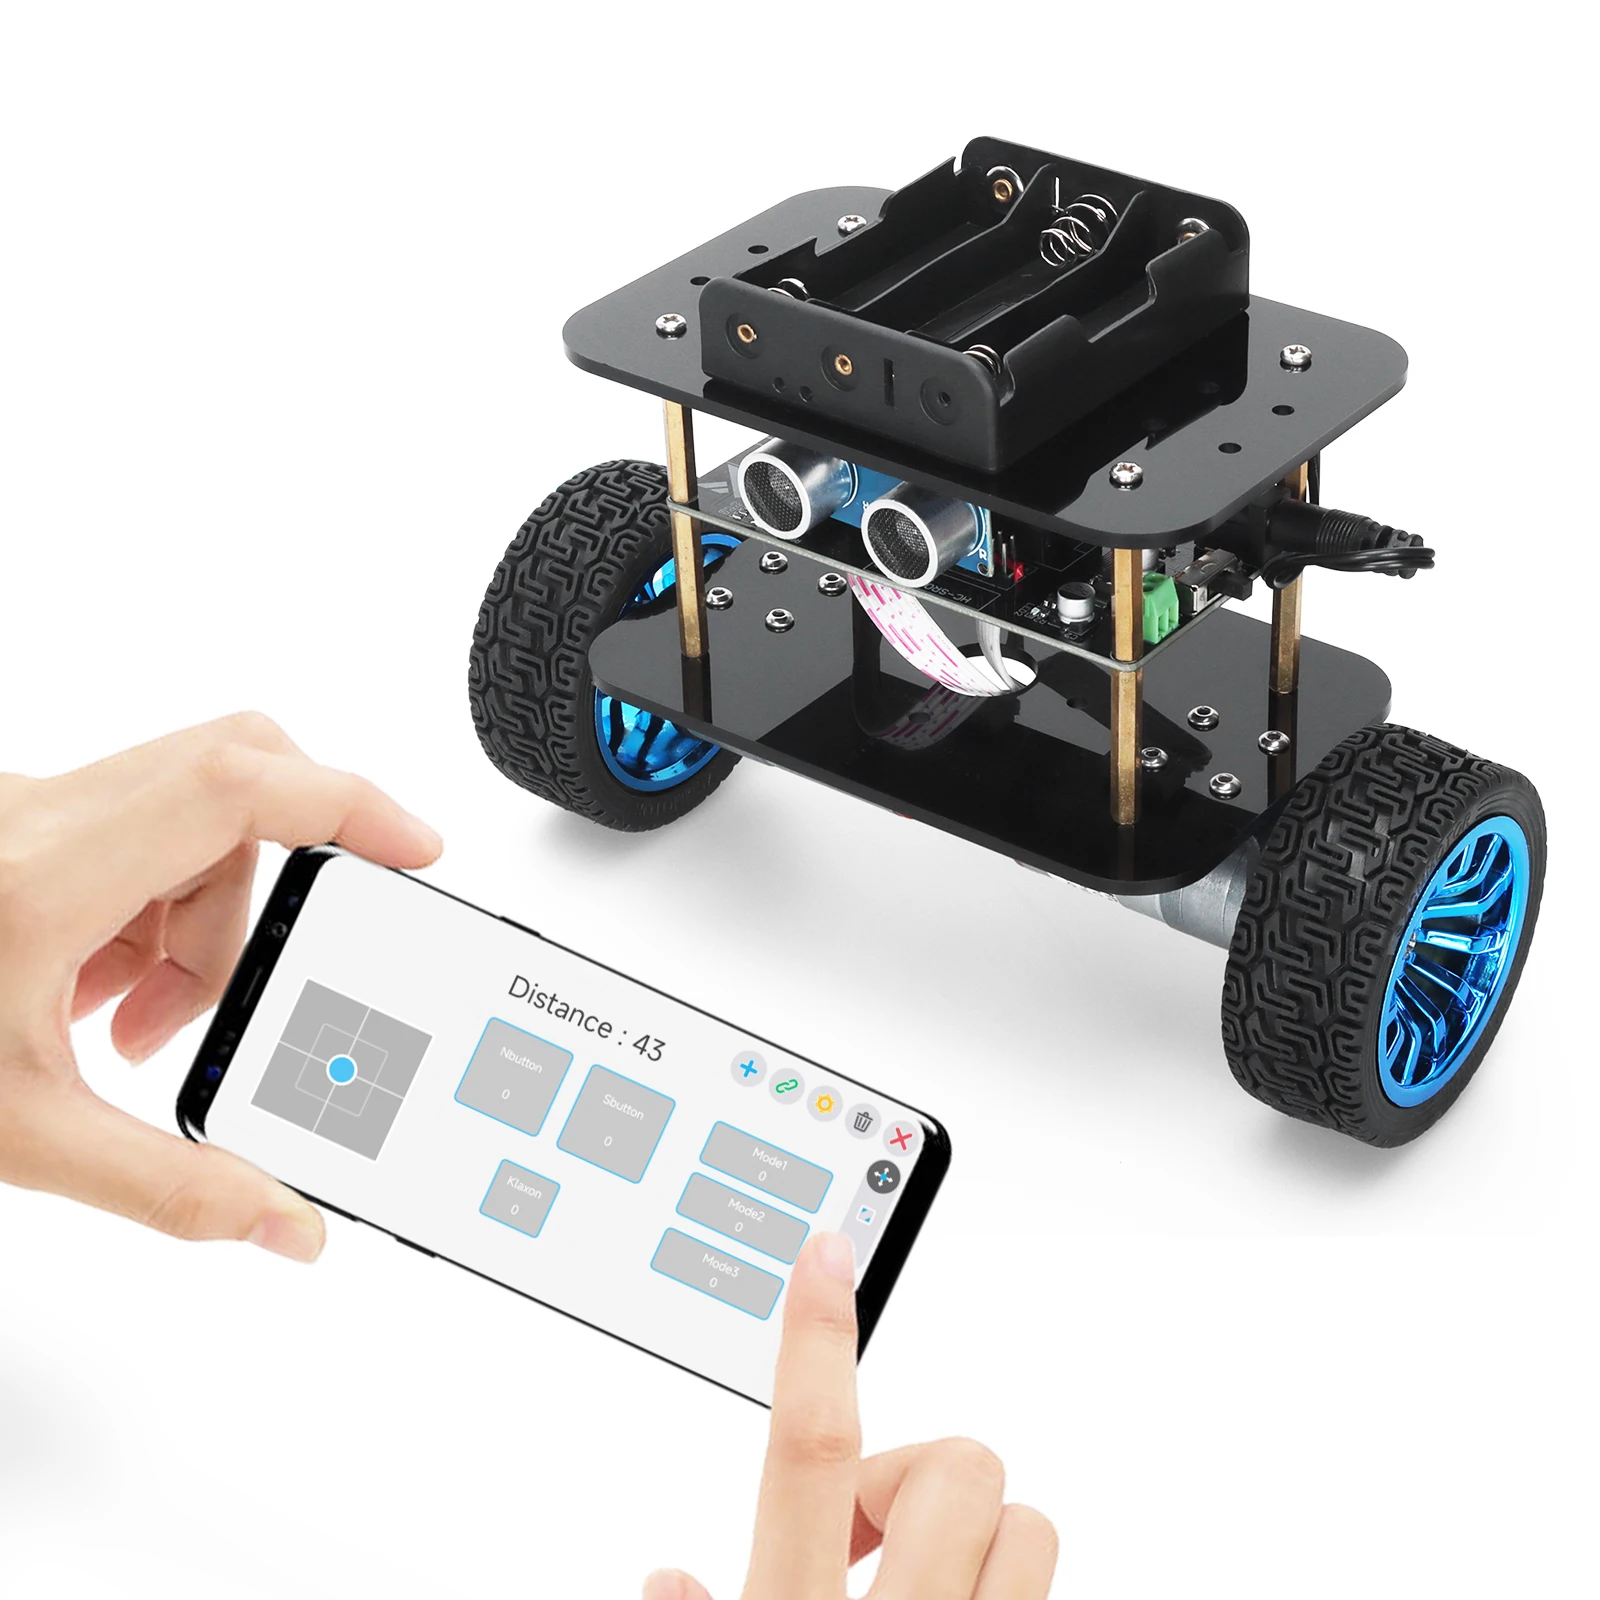 Enlarge Smart Balance Robot Car Kit for Arduino Programming Project Full Version Automation Starter Set for Educational ,+e-Instructions